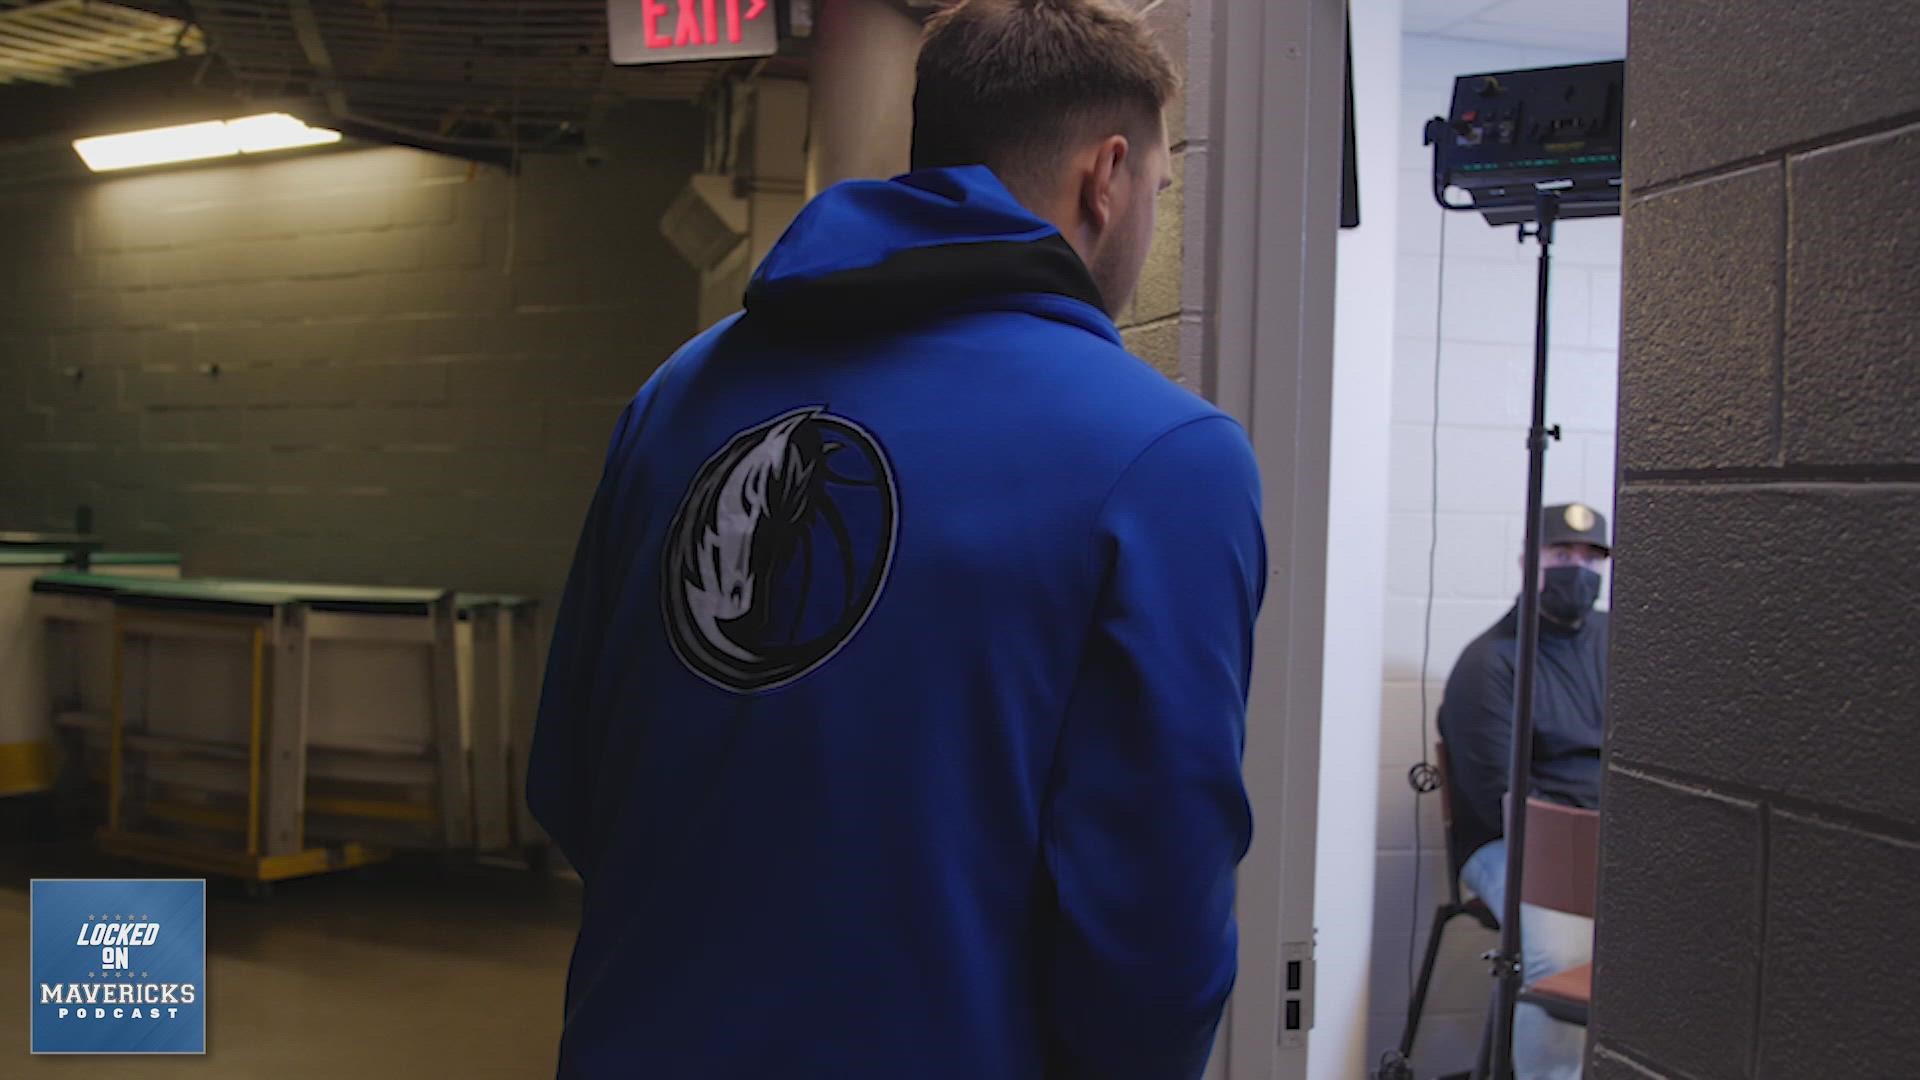 Luka Doncic sat down for an interview with @NickVanExit and @IssacLHarris on Dallas Mavericks Media Day.